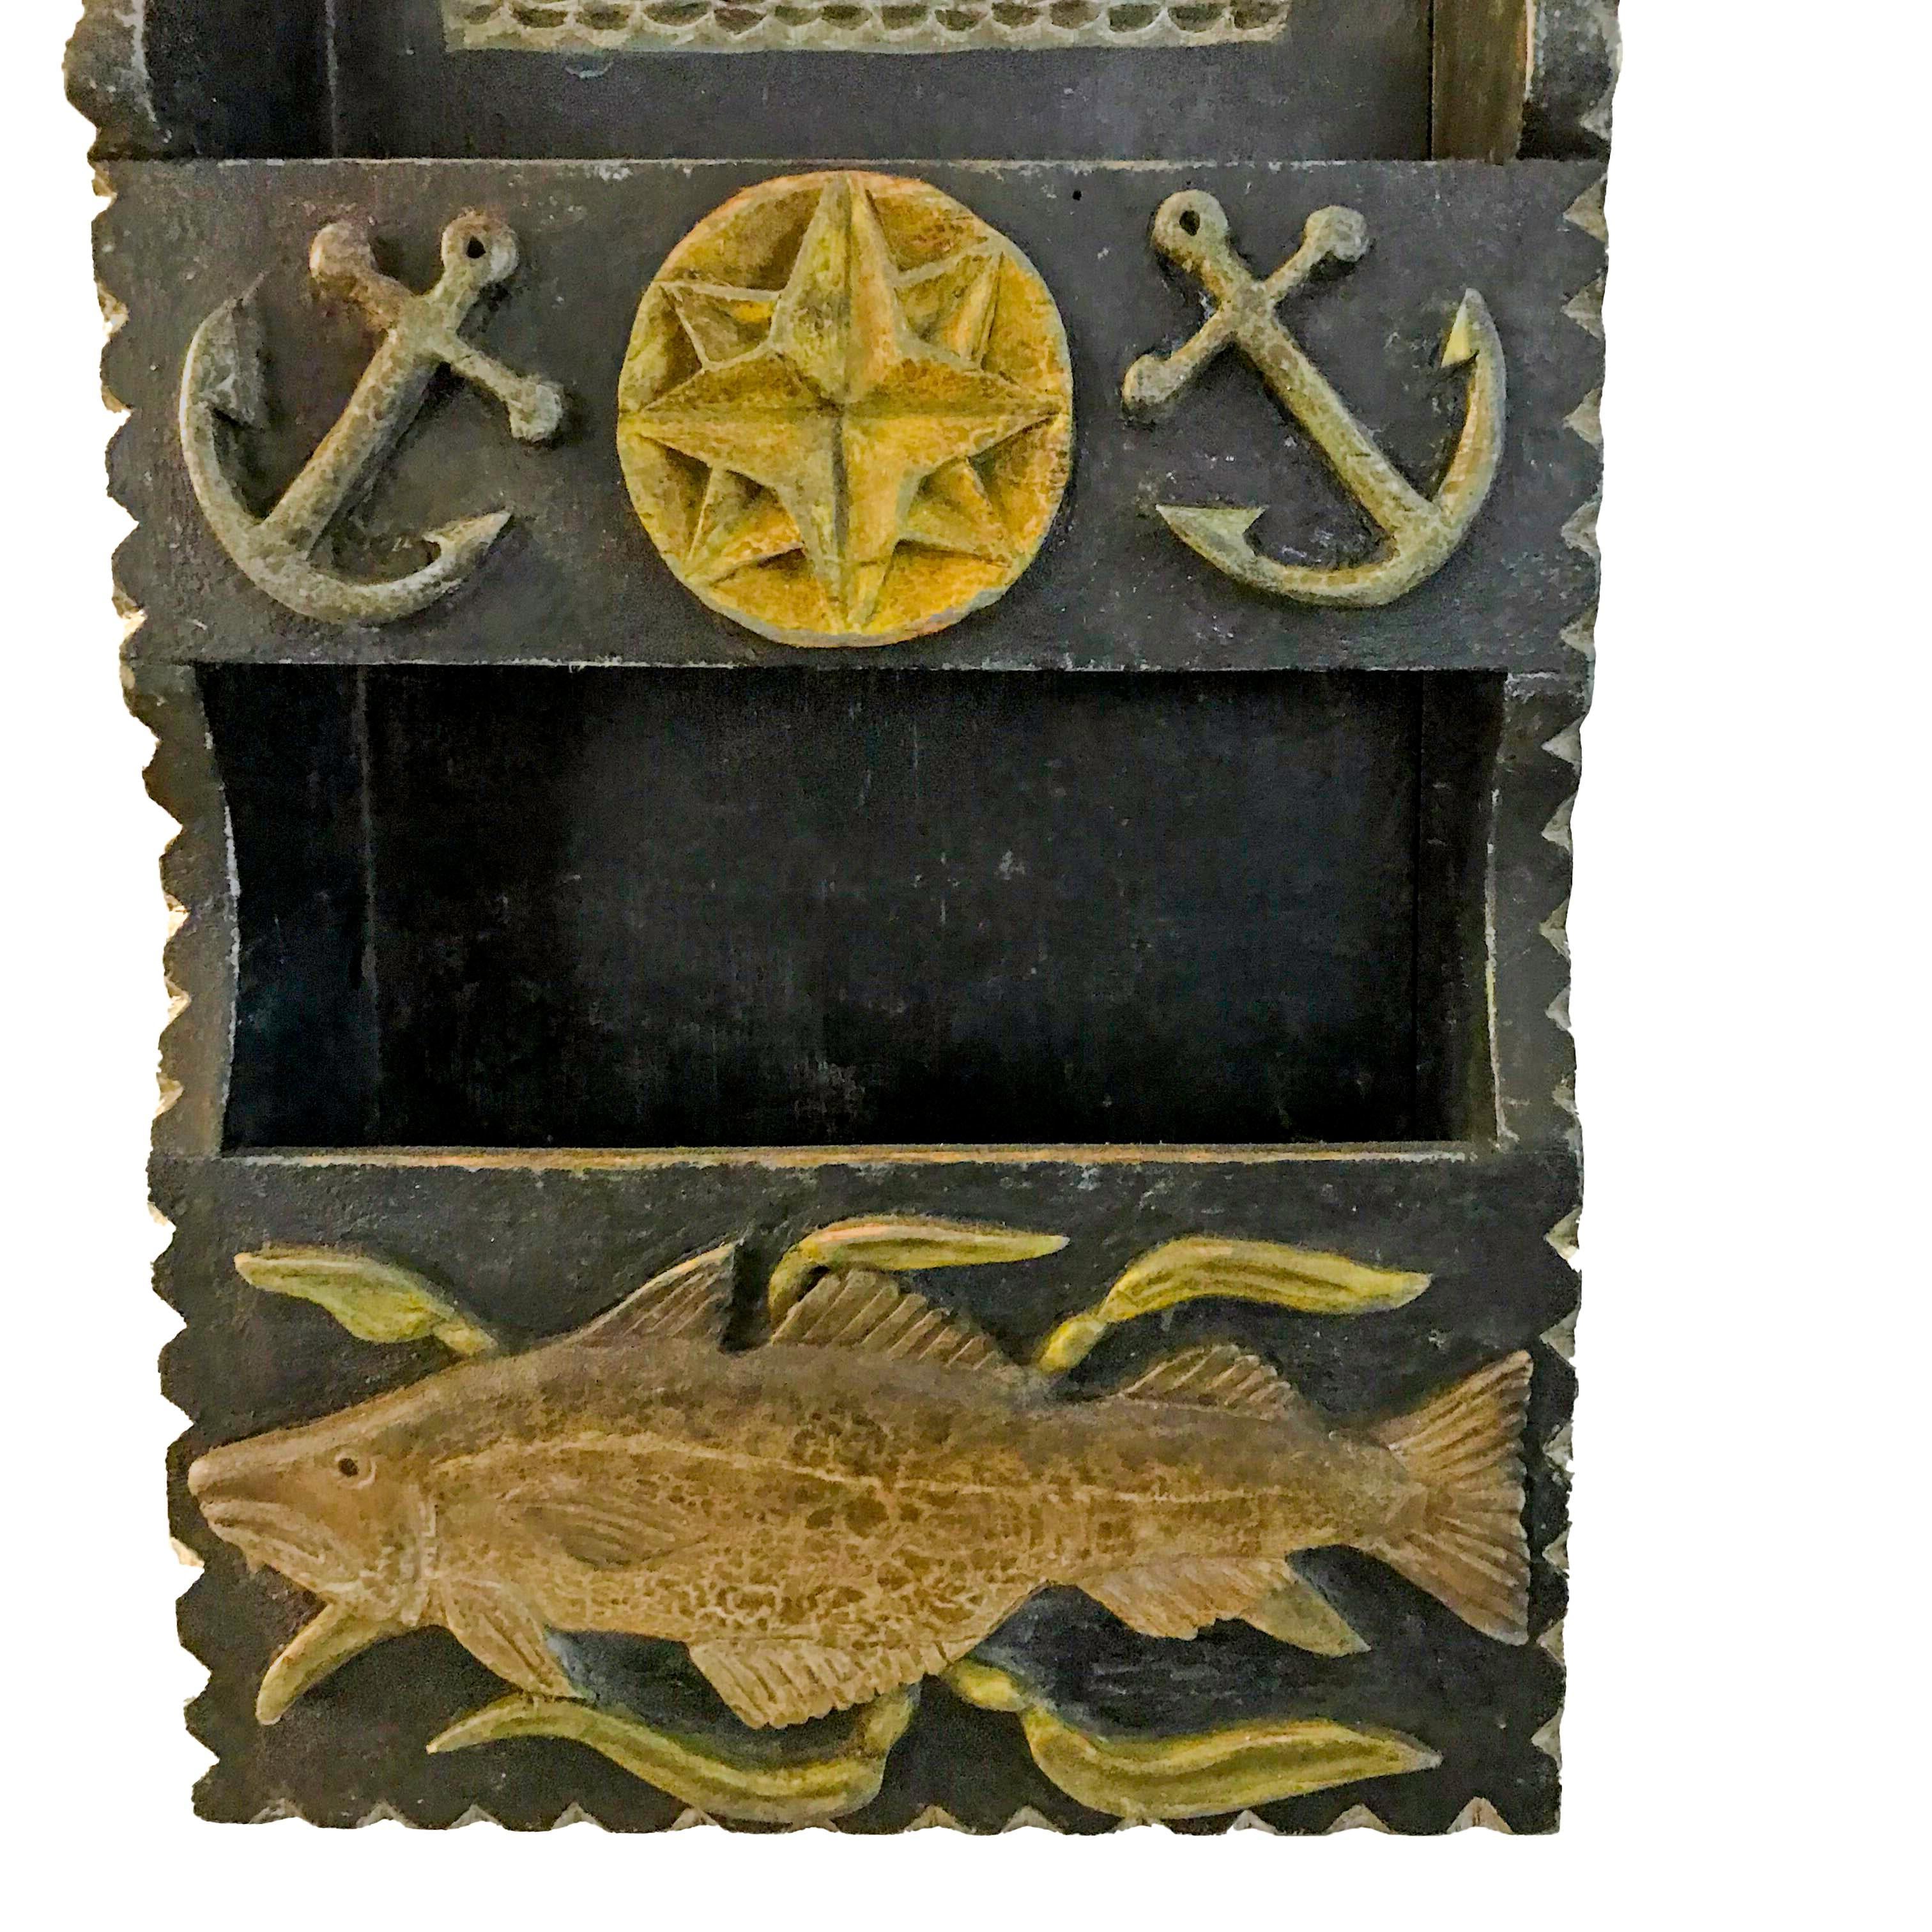 Hanging wall box, carved from pine, with two pockets, the ship is carved in relief and the fish, leaves, compass and anchors are applied. The edges are chip carved and painted white with a pierced lollipop backboard. The sides have a great alligator